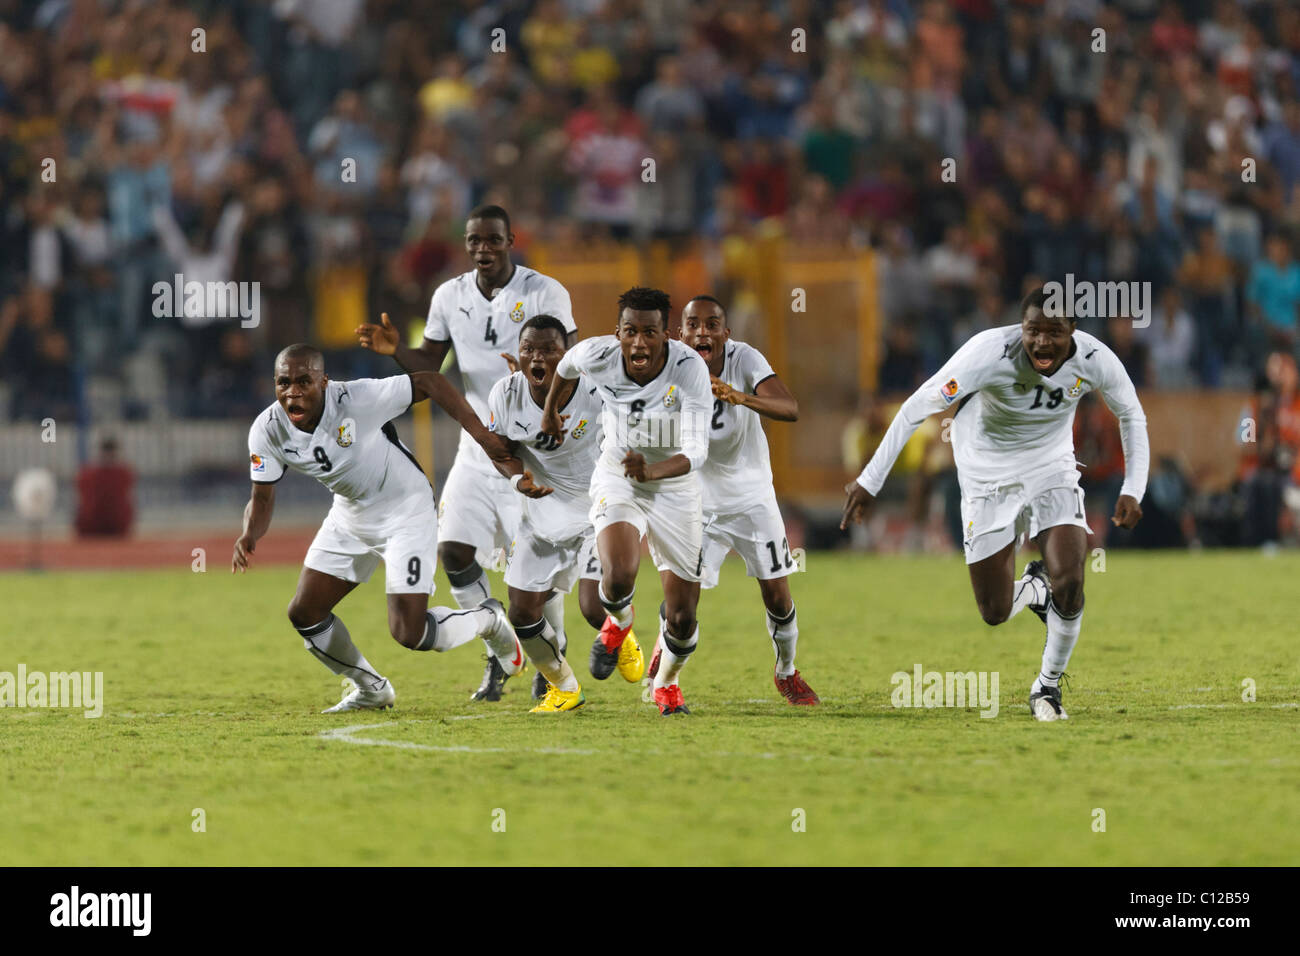 Ghana players react after defeating Brazil in a penalty kick shoot out to win the 2009 FIFA U-20 World Cup championship. Stock Photo